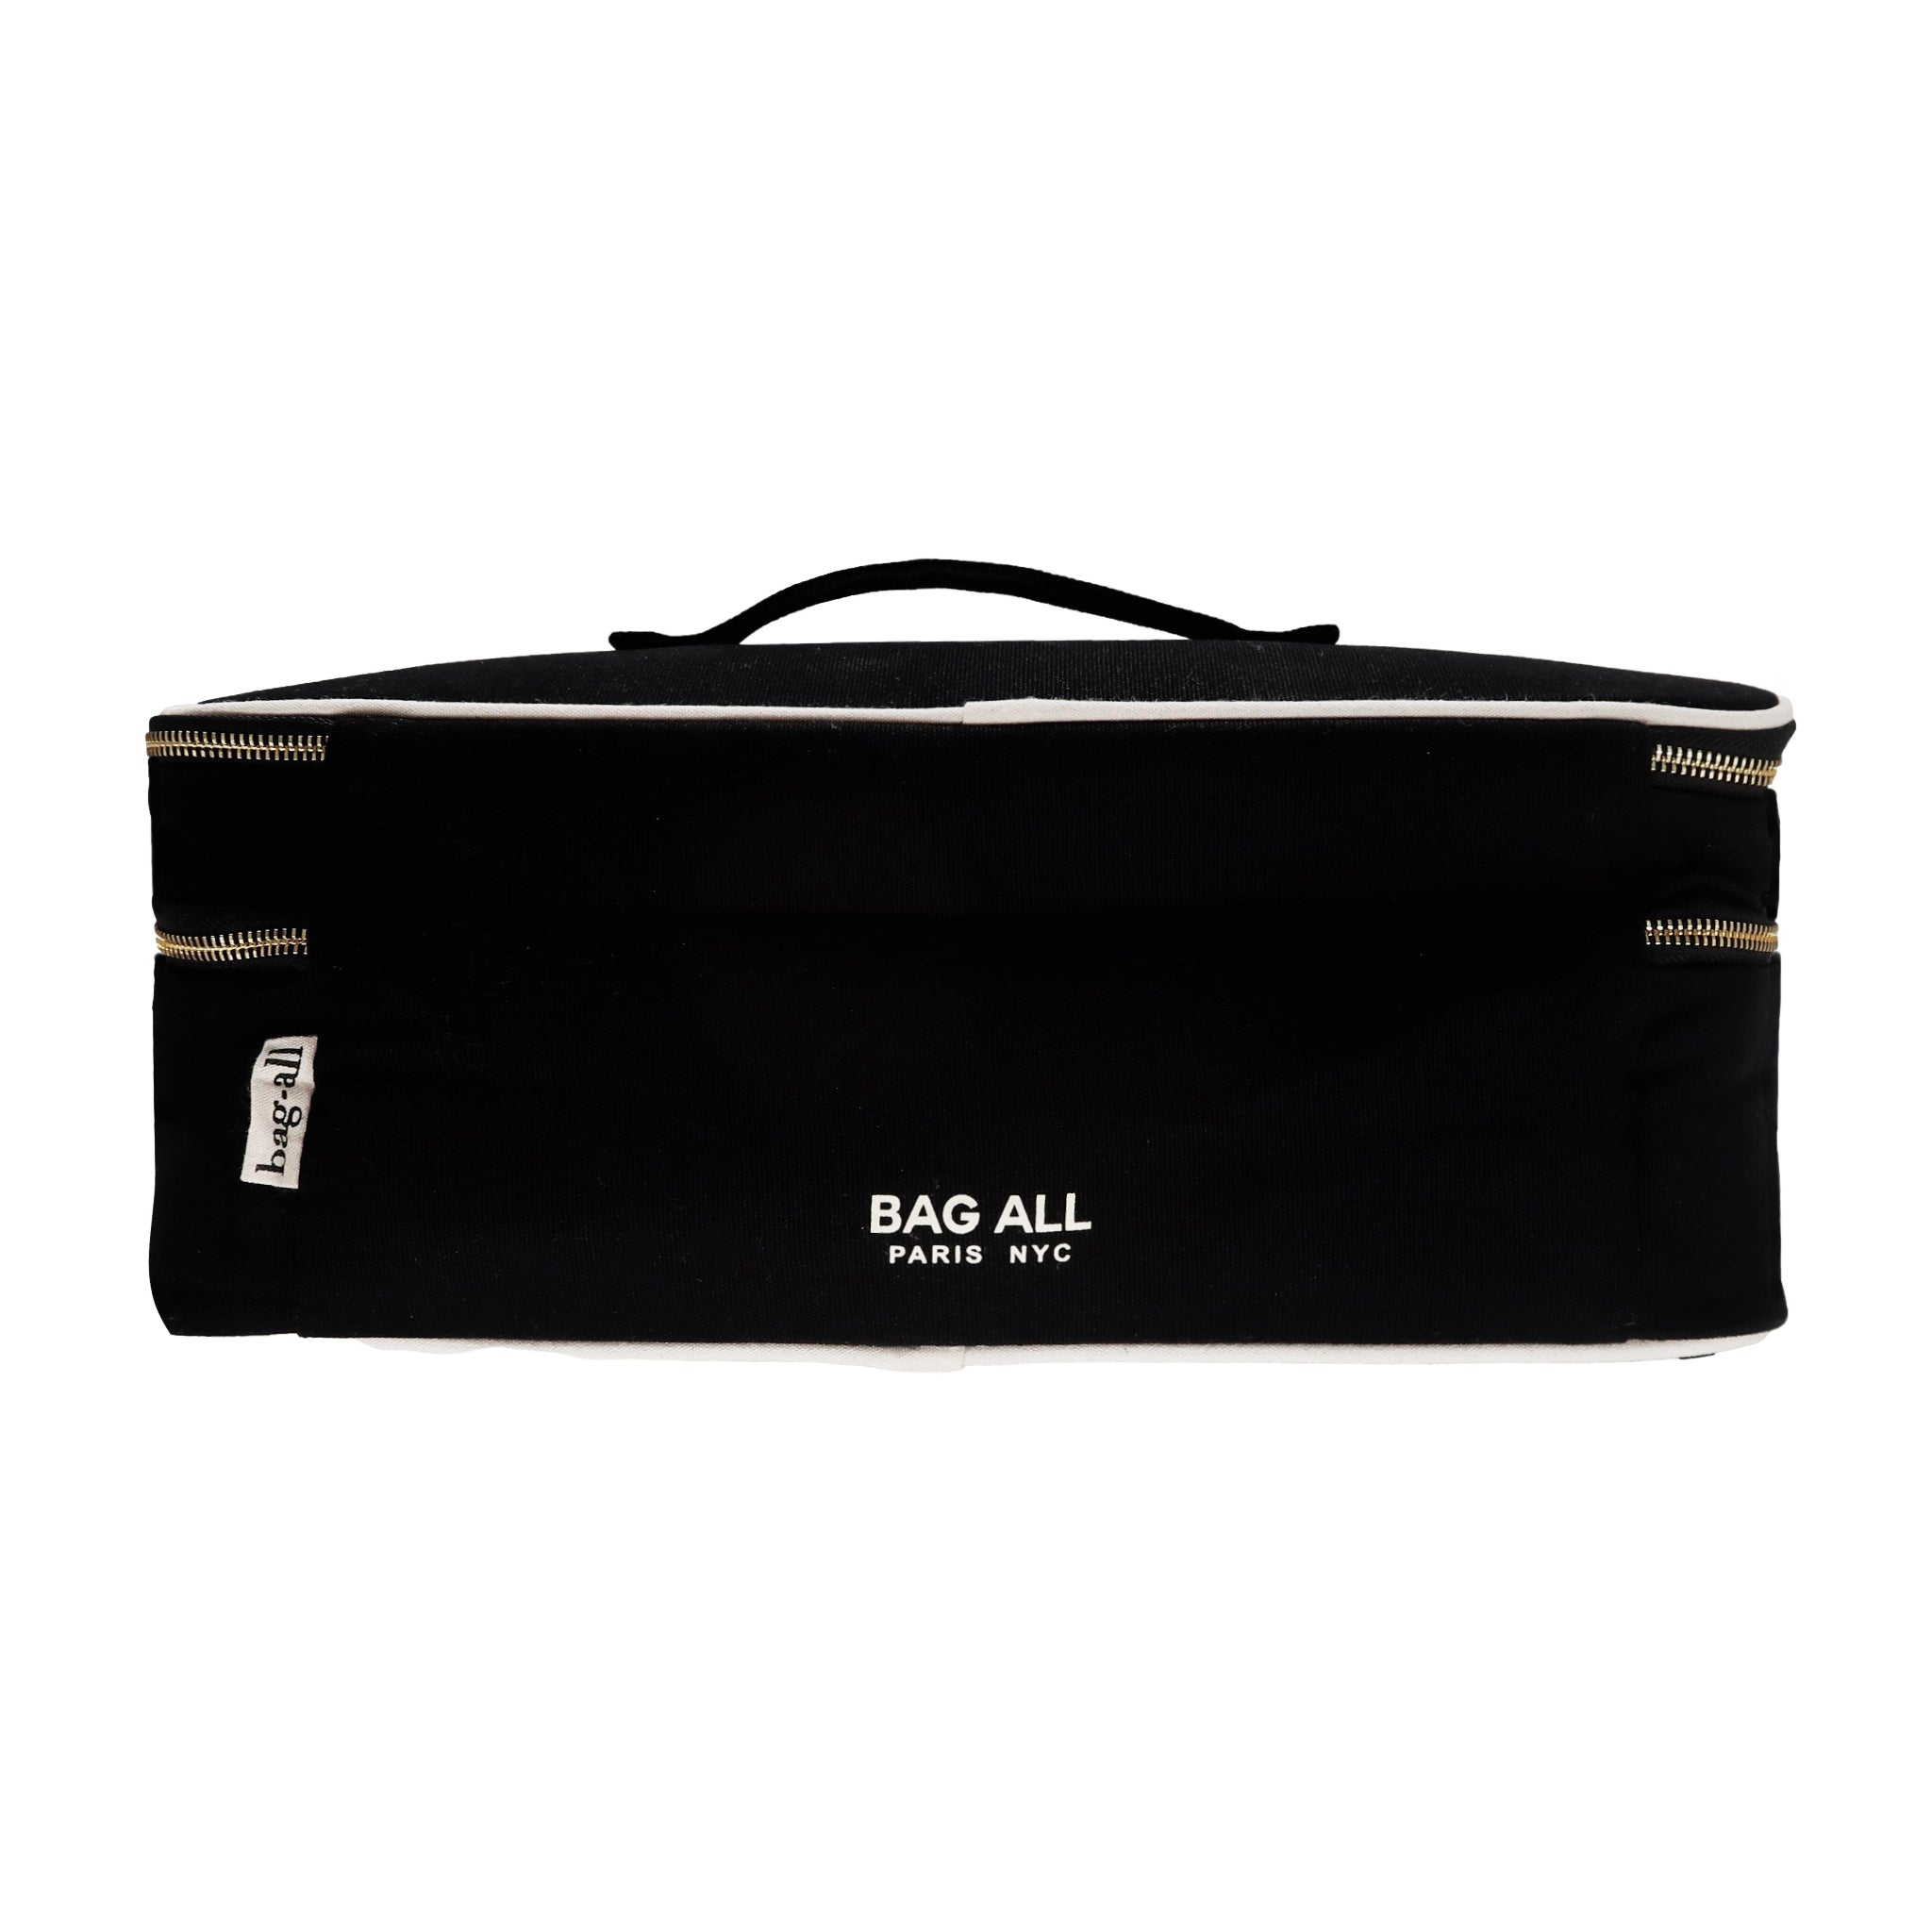 Double Hair Tools Travel Case, Black | Bag-all